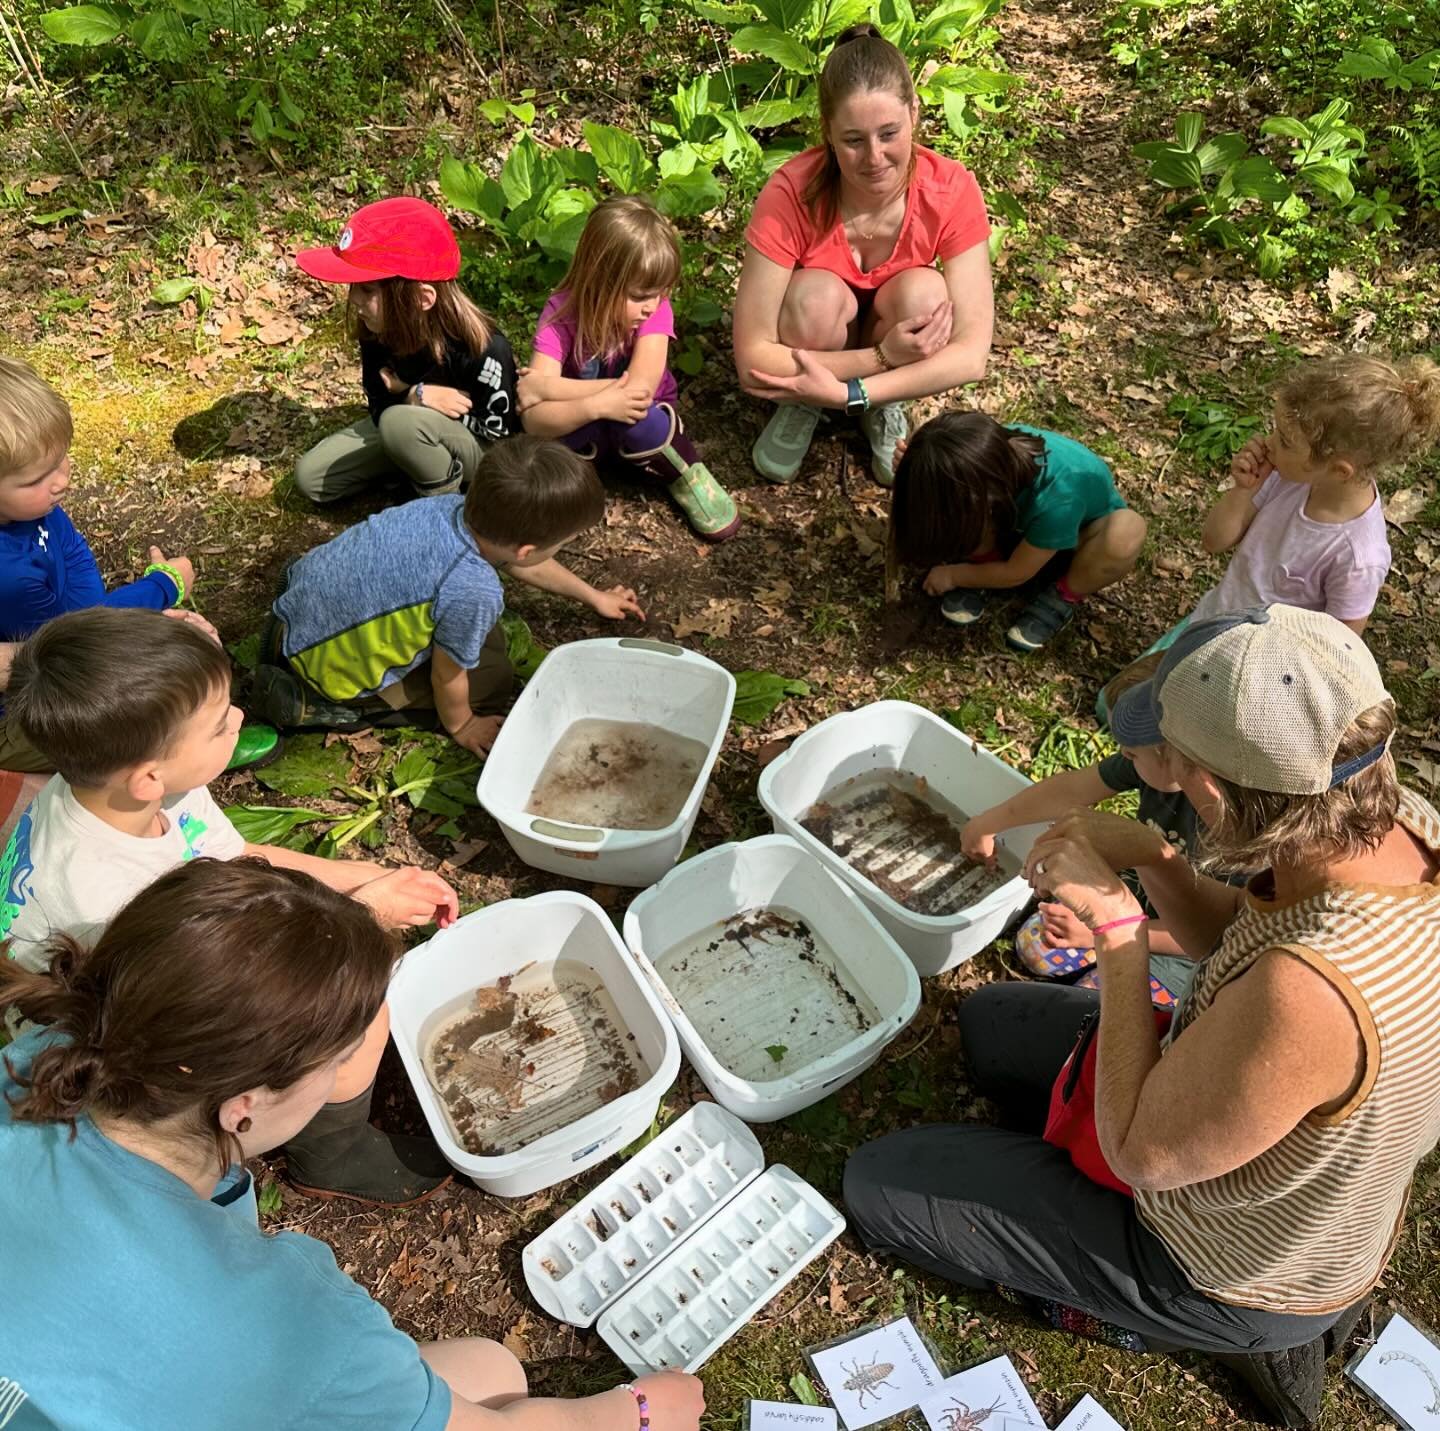 Today was full of lots of water exploration at Rooted &amp; Free! Our preschool class spent the first part of the day journeying to the stream while checking out the story walk. This told us about some of the ways we can search for the critters that 